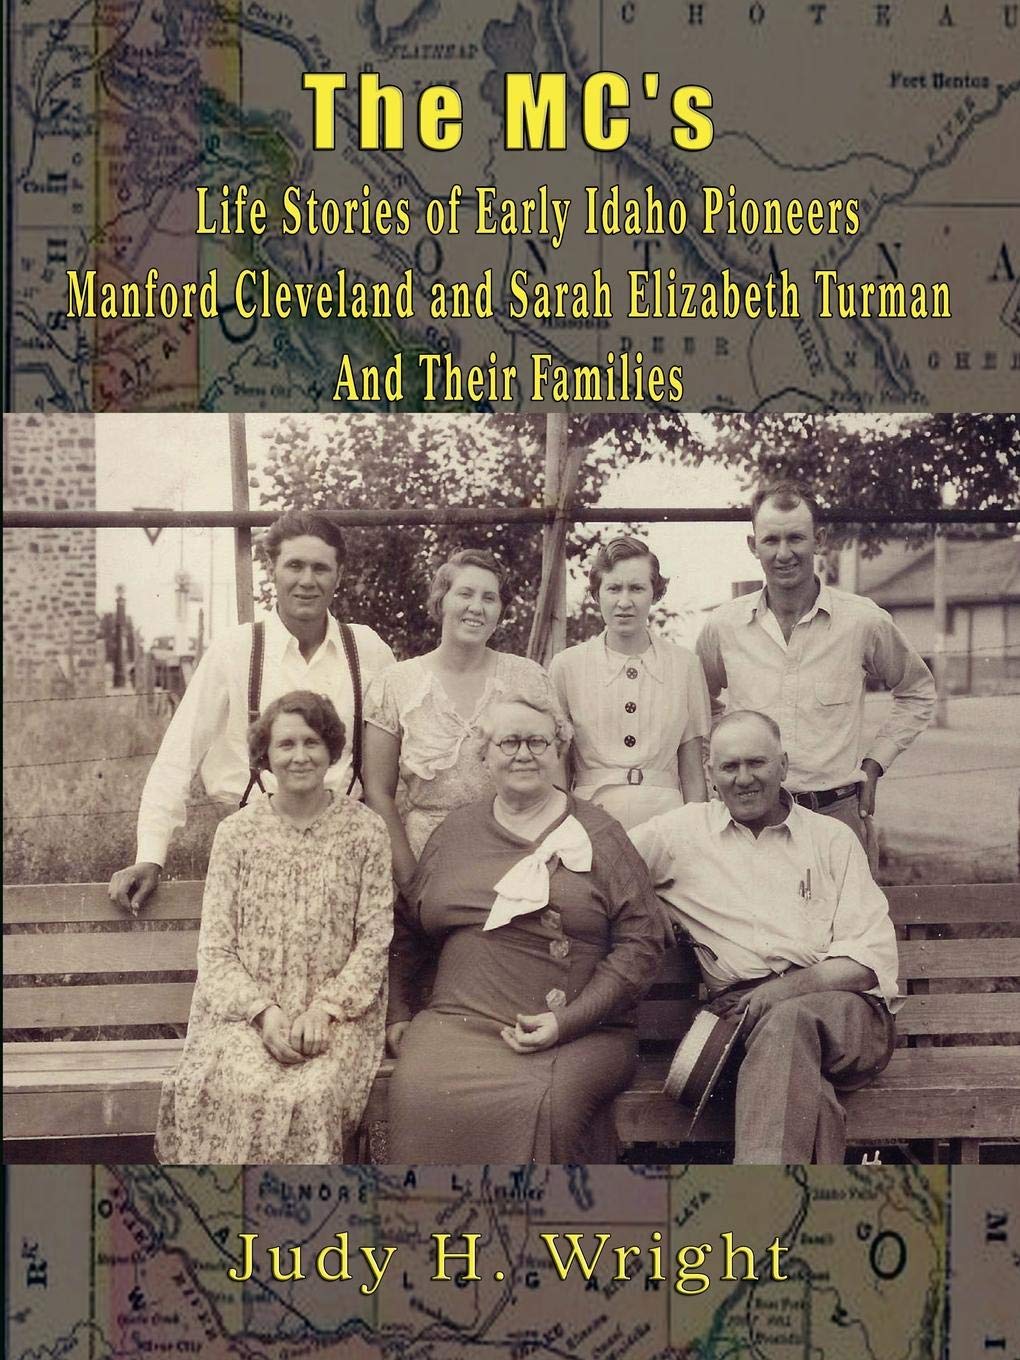 The MC's: Life stories of early Idaho pioneers Manford Cleveland and Sarah Elizabeth Turman and their families (book cover)